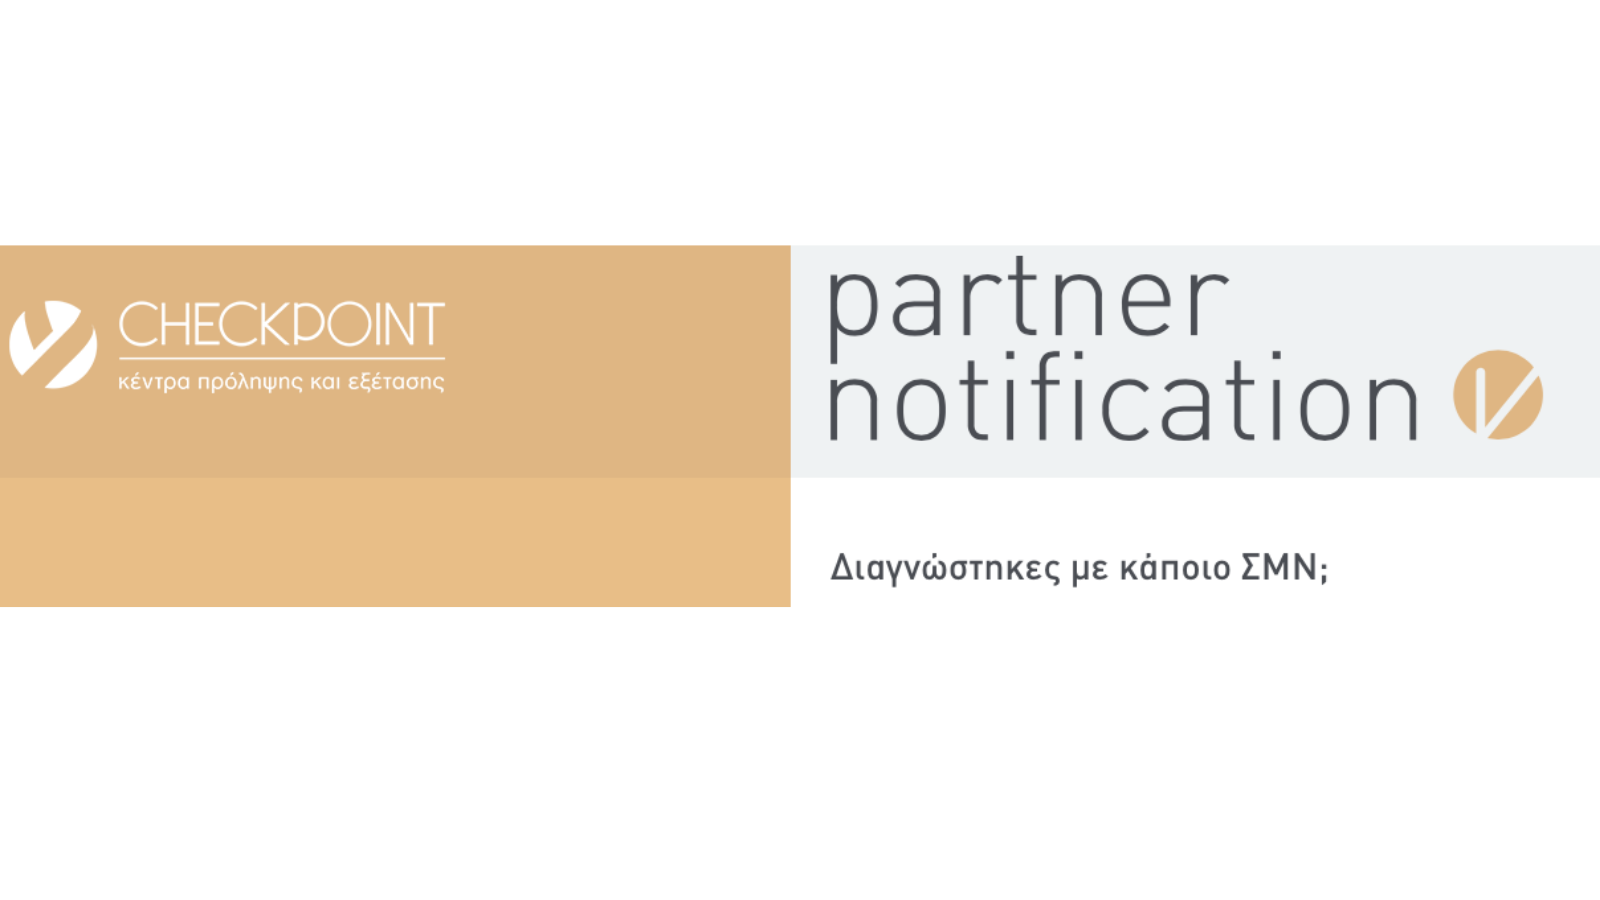 Featured image for “Tα Checkpoint καλωσορίζουν το Partner Notification”